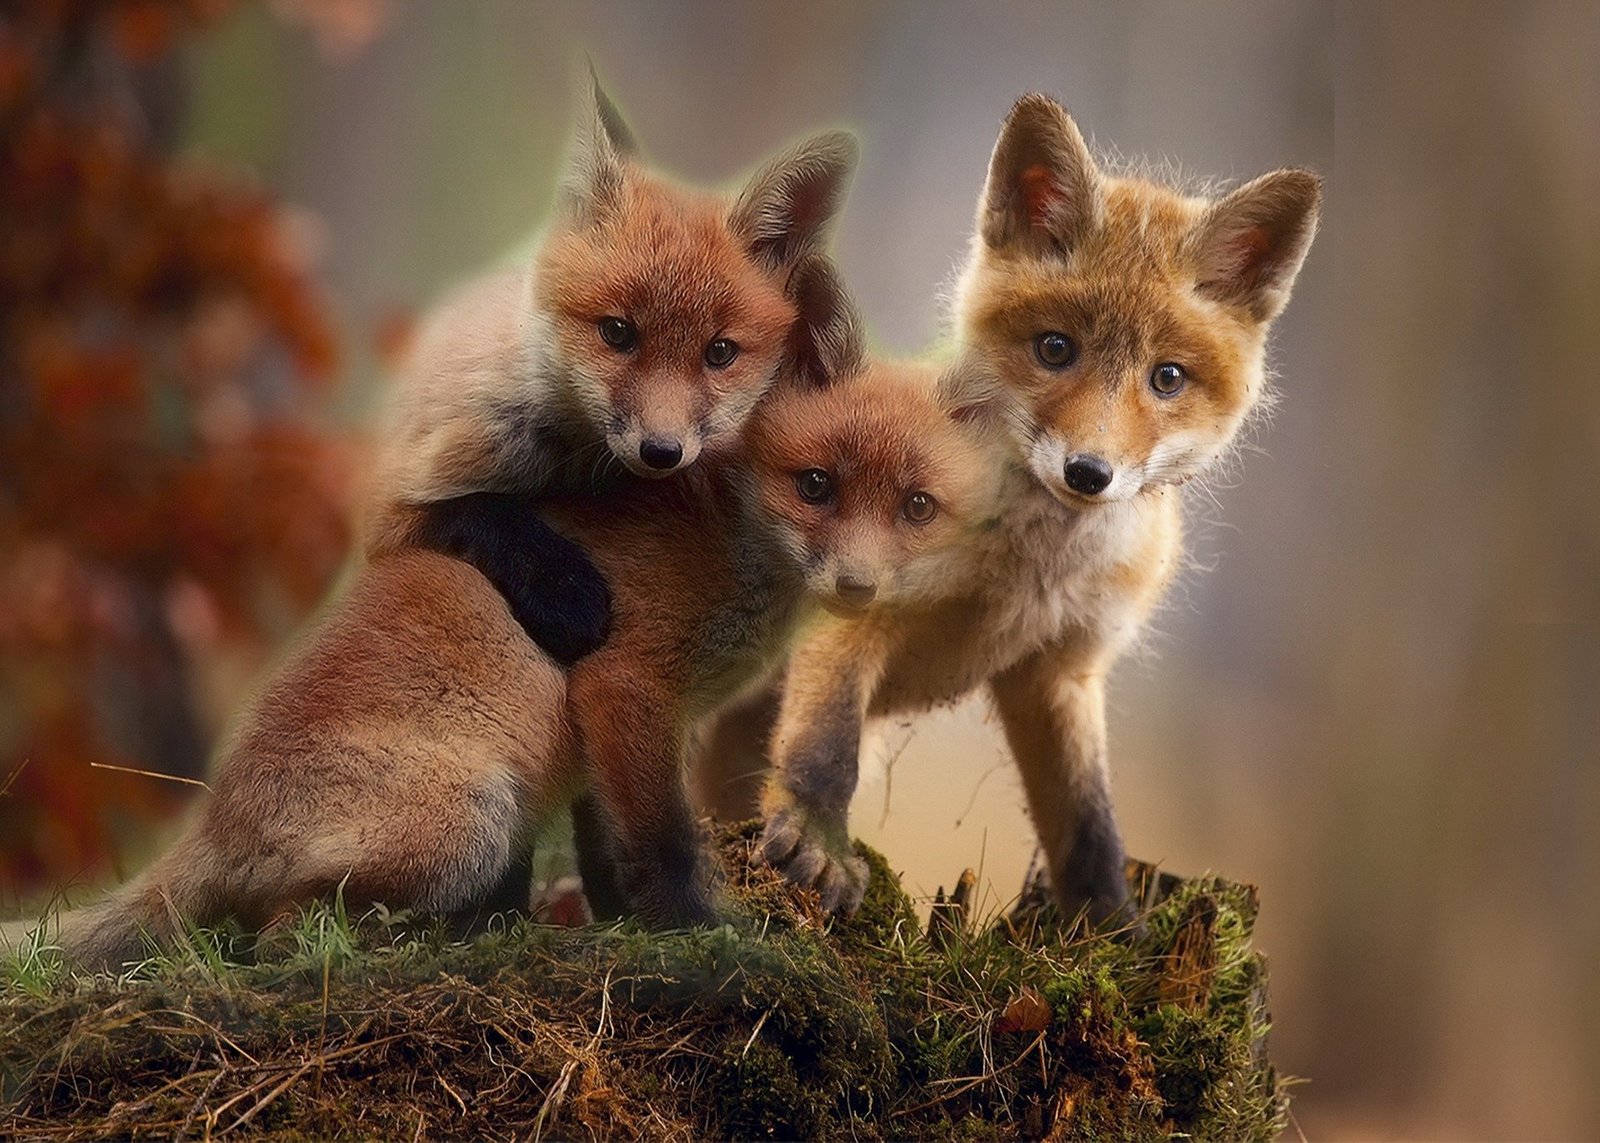 Picture of baby red foxes called kits